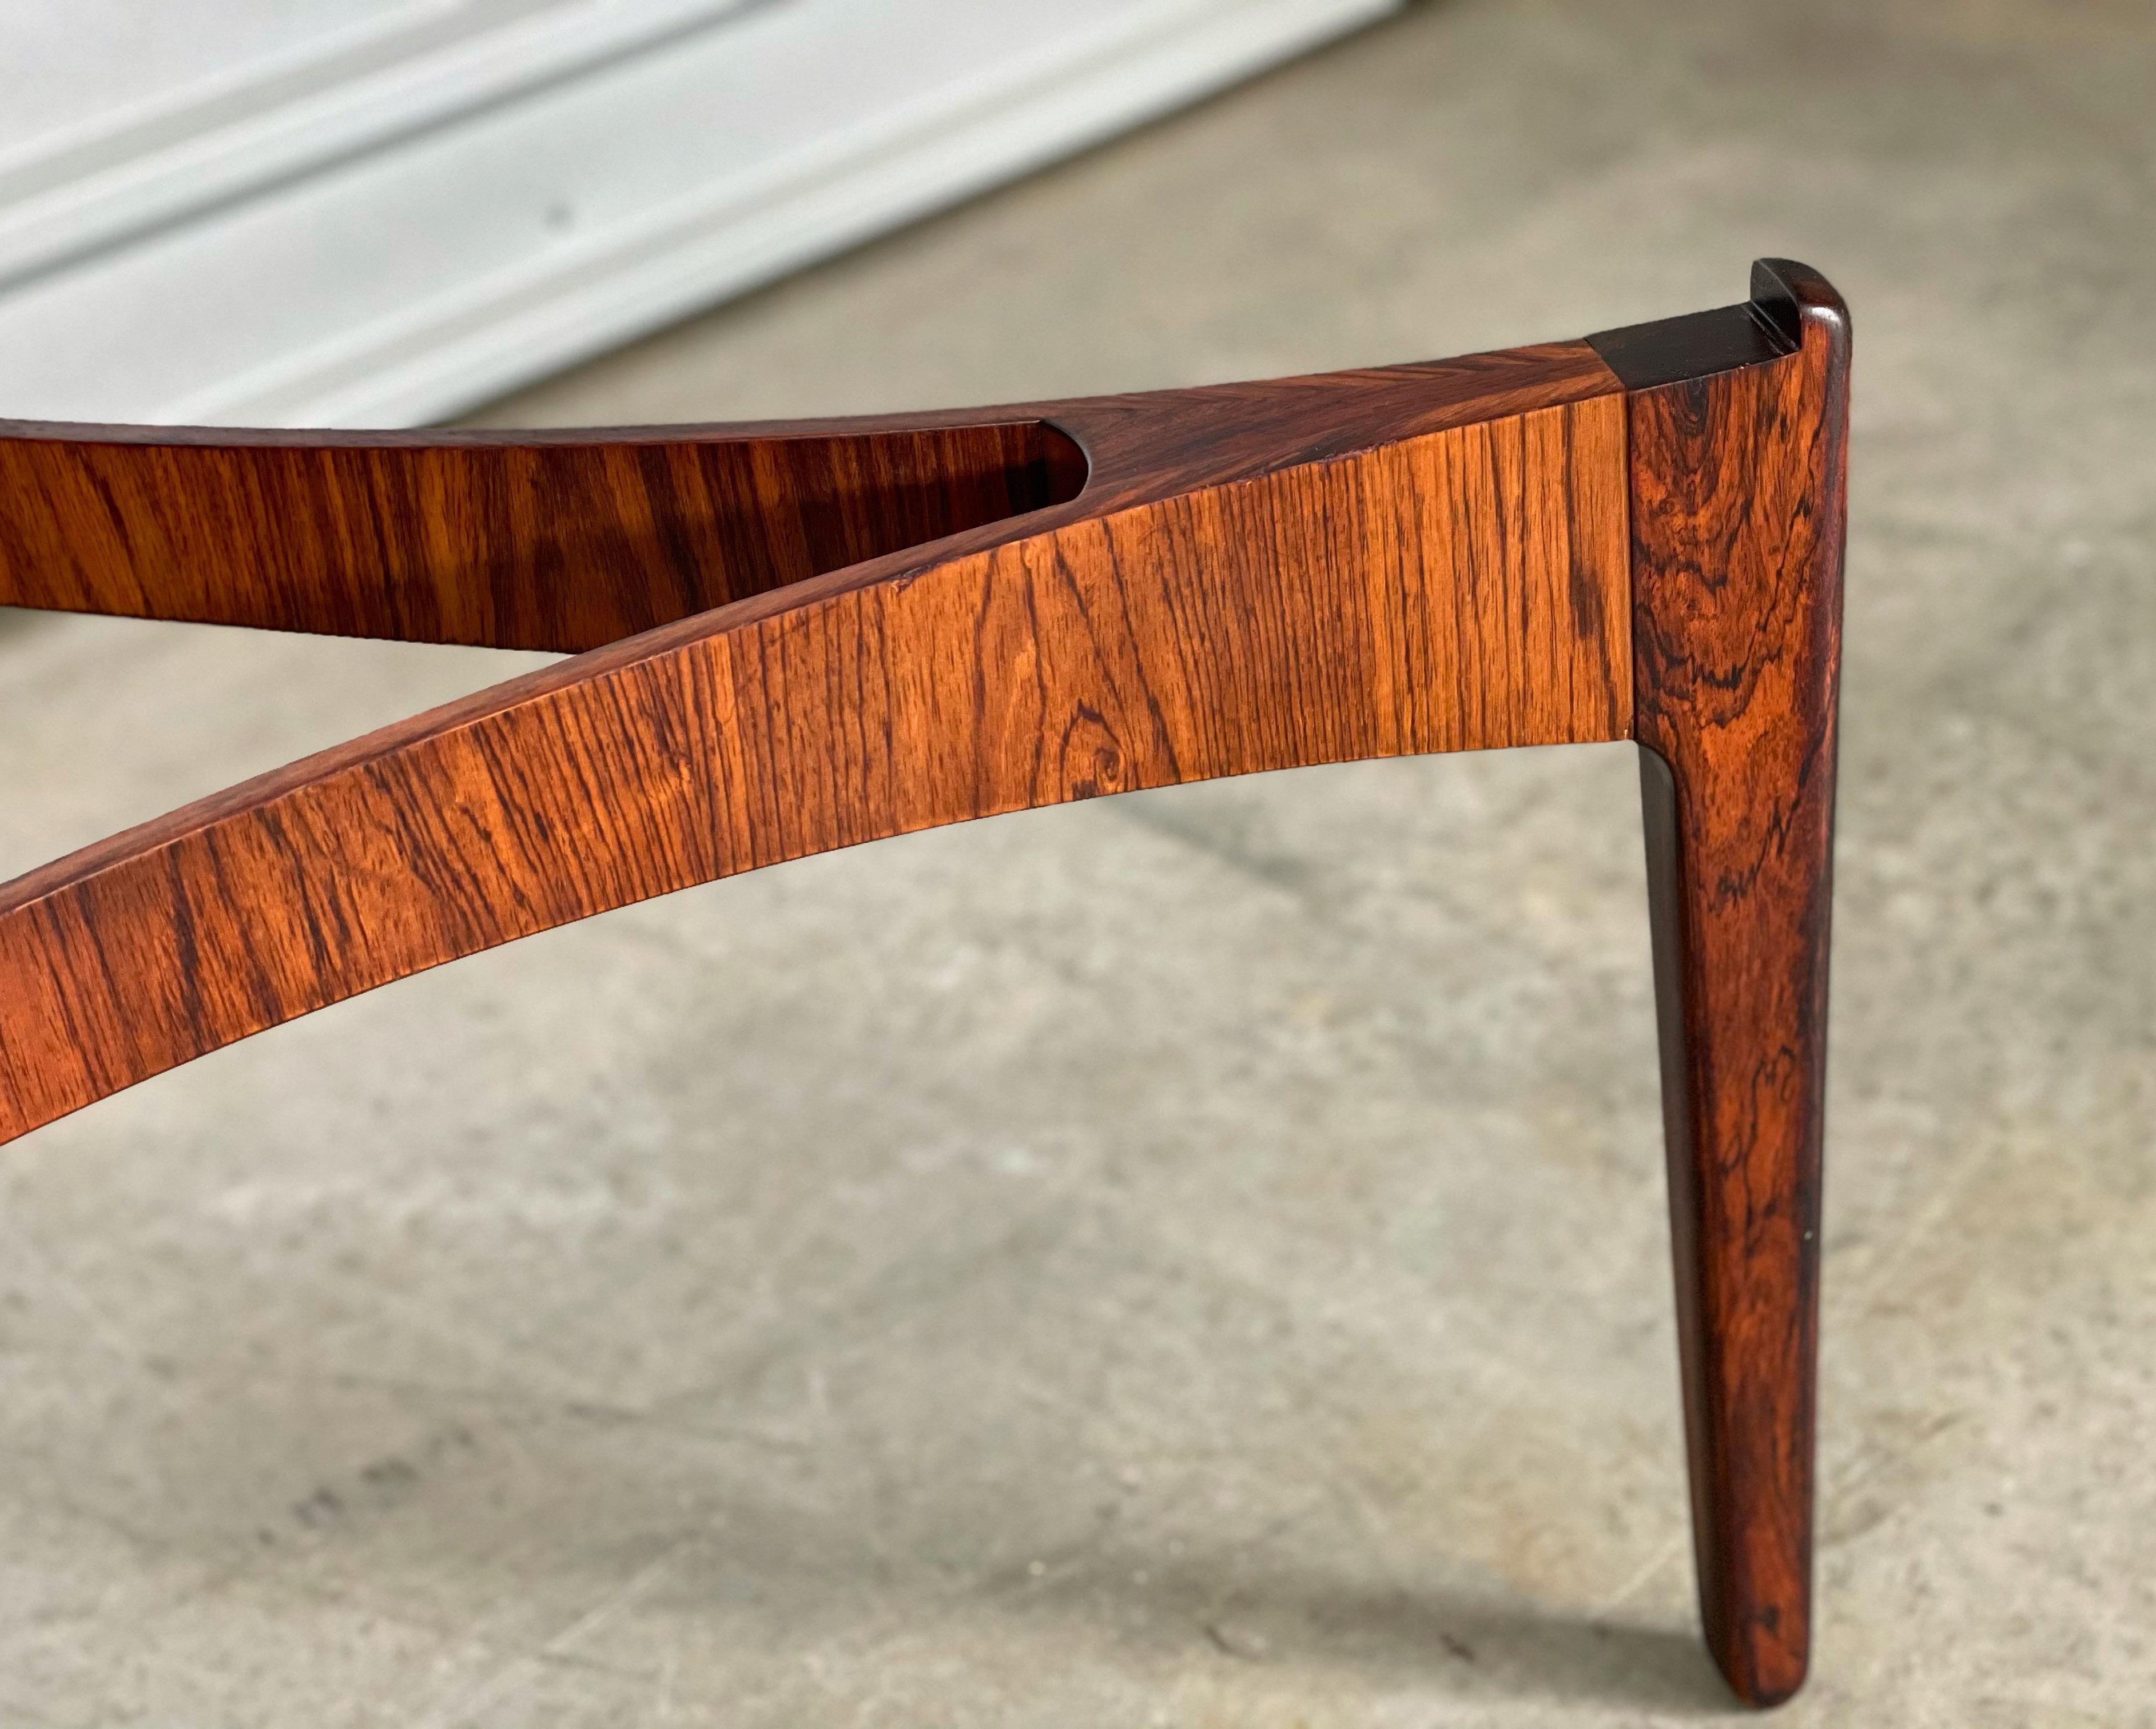 Midcentury Rosewood and Glass Coffee Table by Svend Ellekaer, Denmark 1